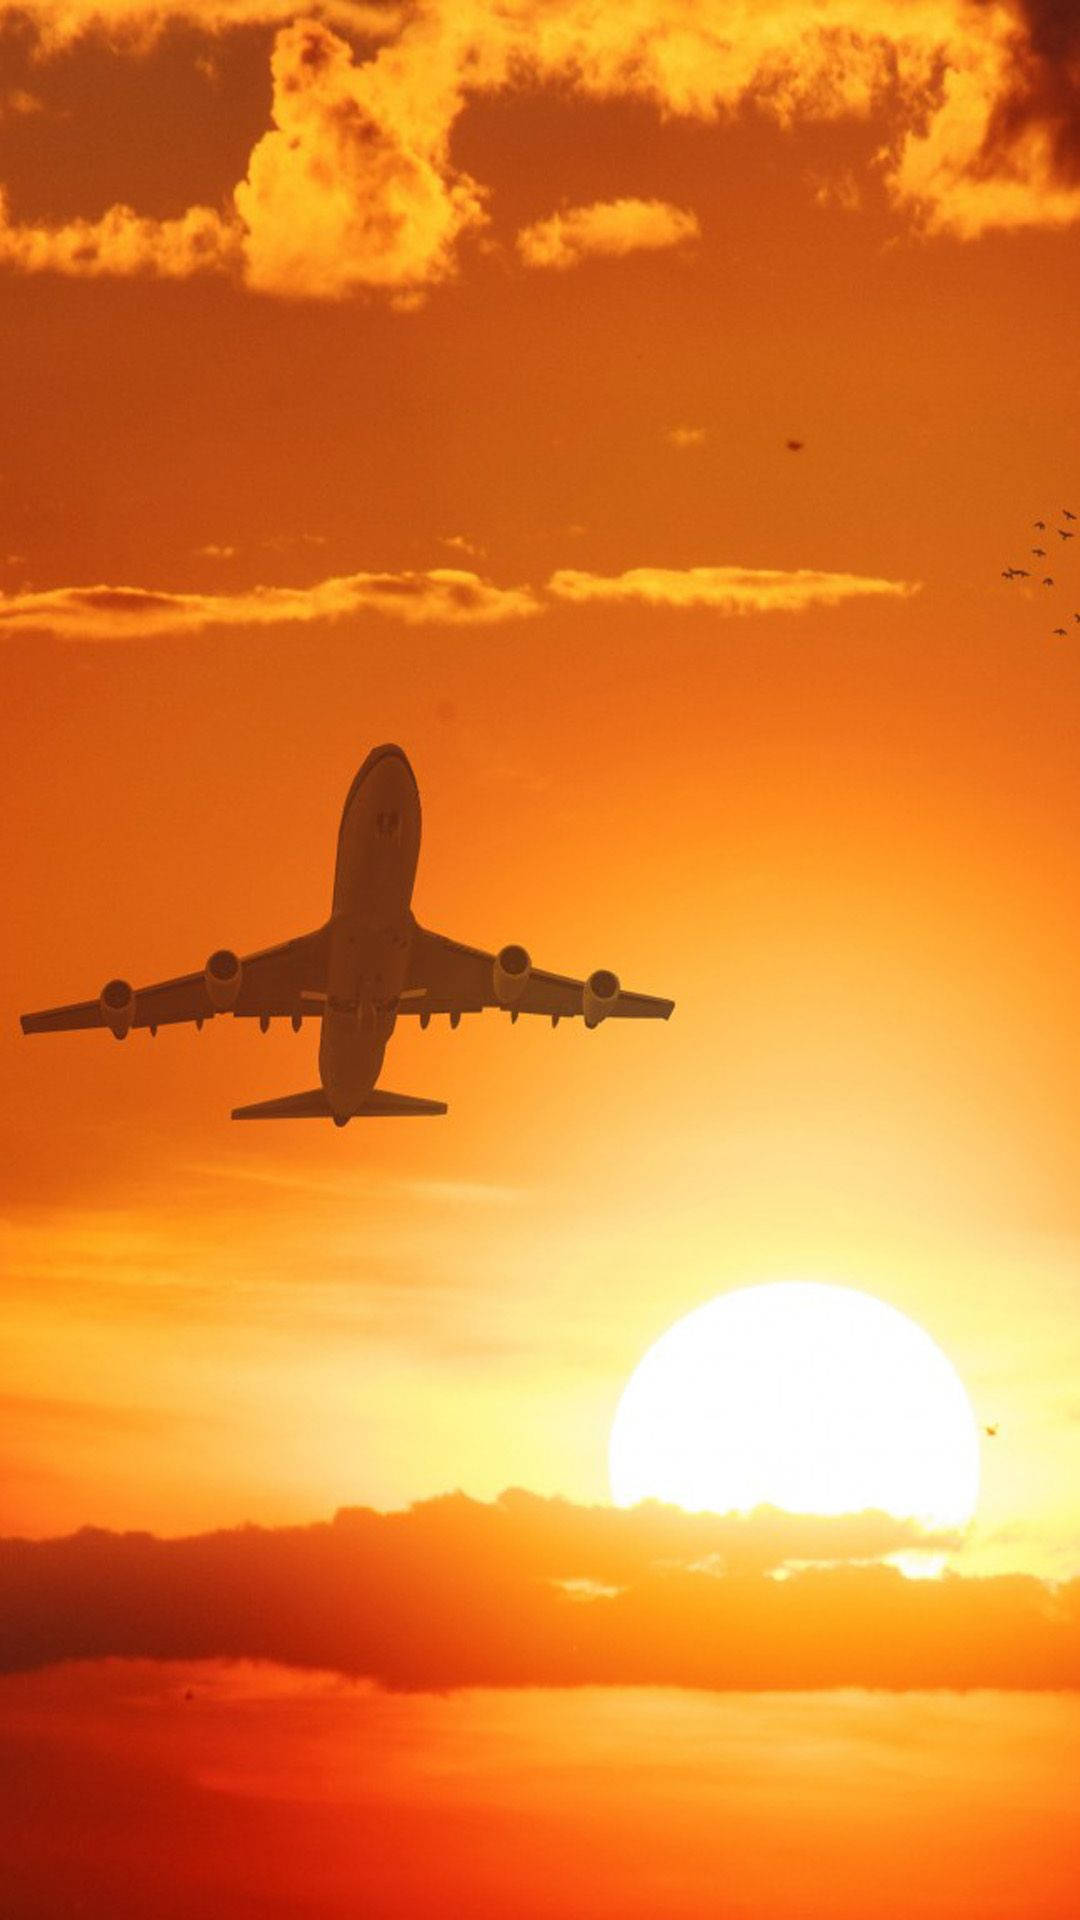 Sunset Silhouette Of Airplane Android Background